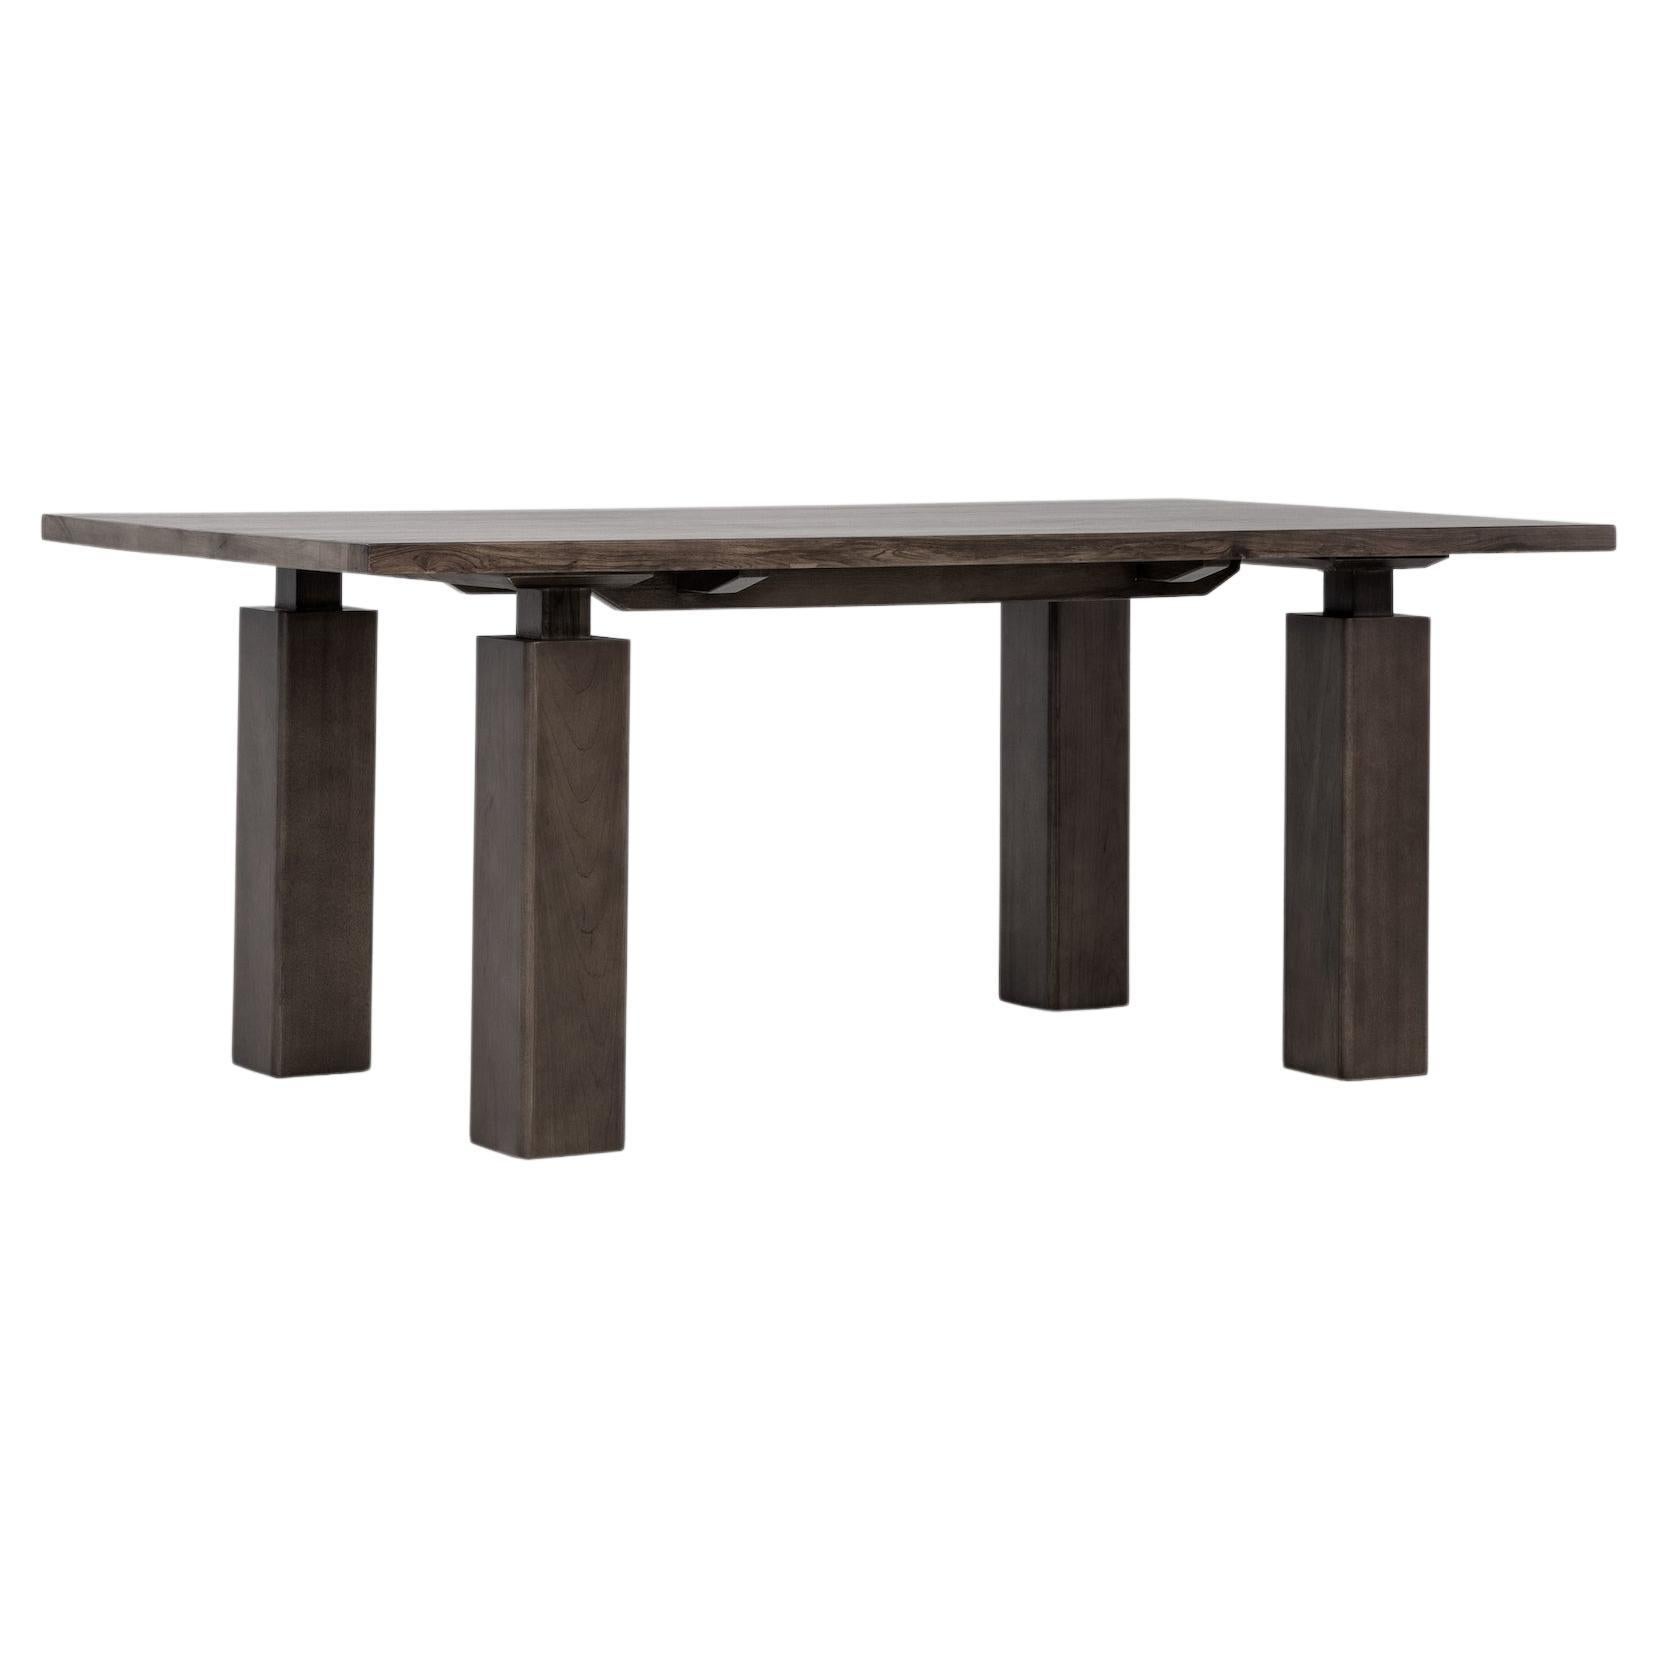 Wolo 76" Dining Table, Minimalist Dining Table in Cocoa